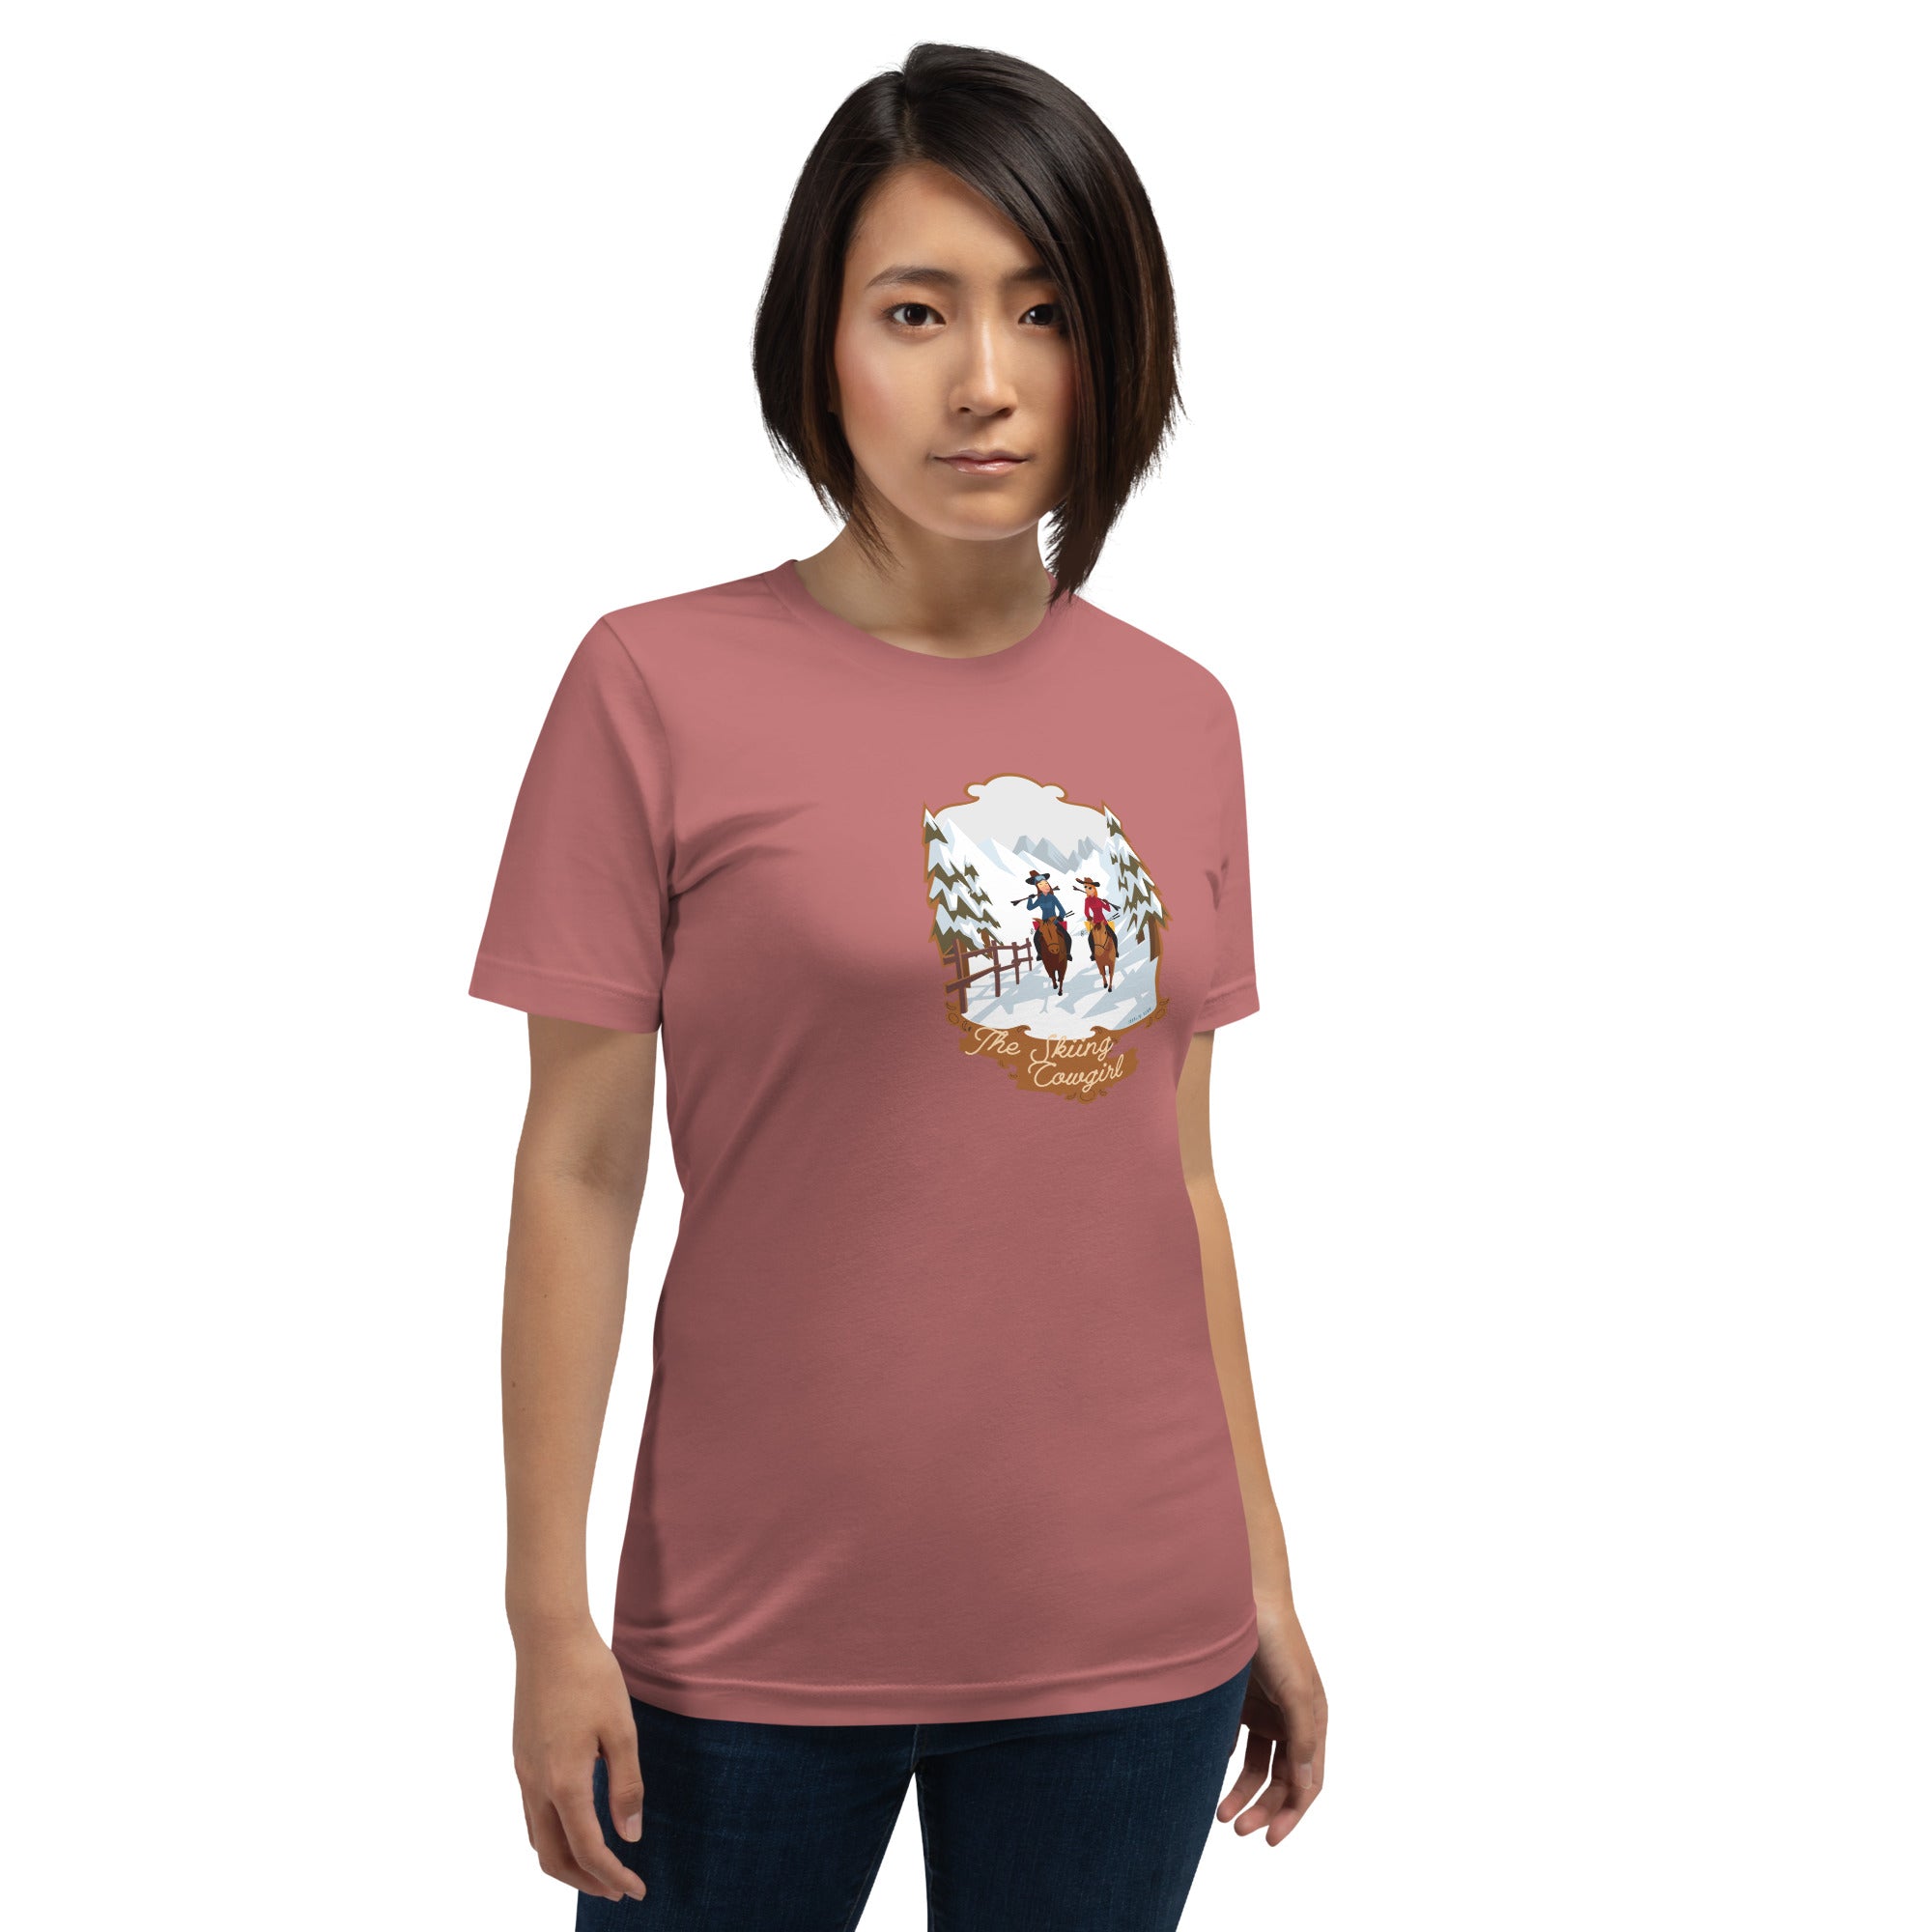 Unisex cotton t-shirt The Skiing Cowgirl on bright colors